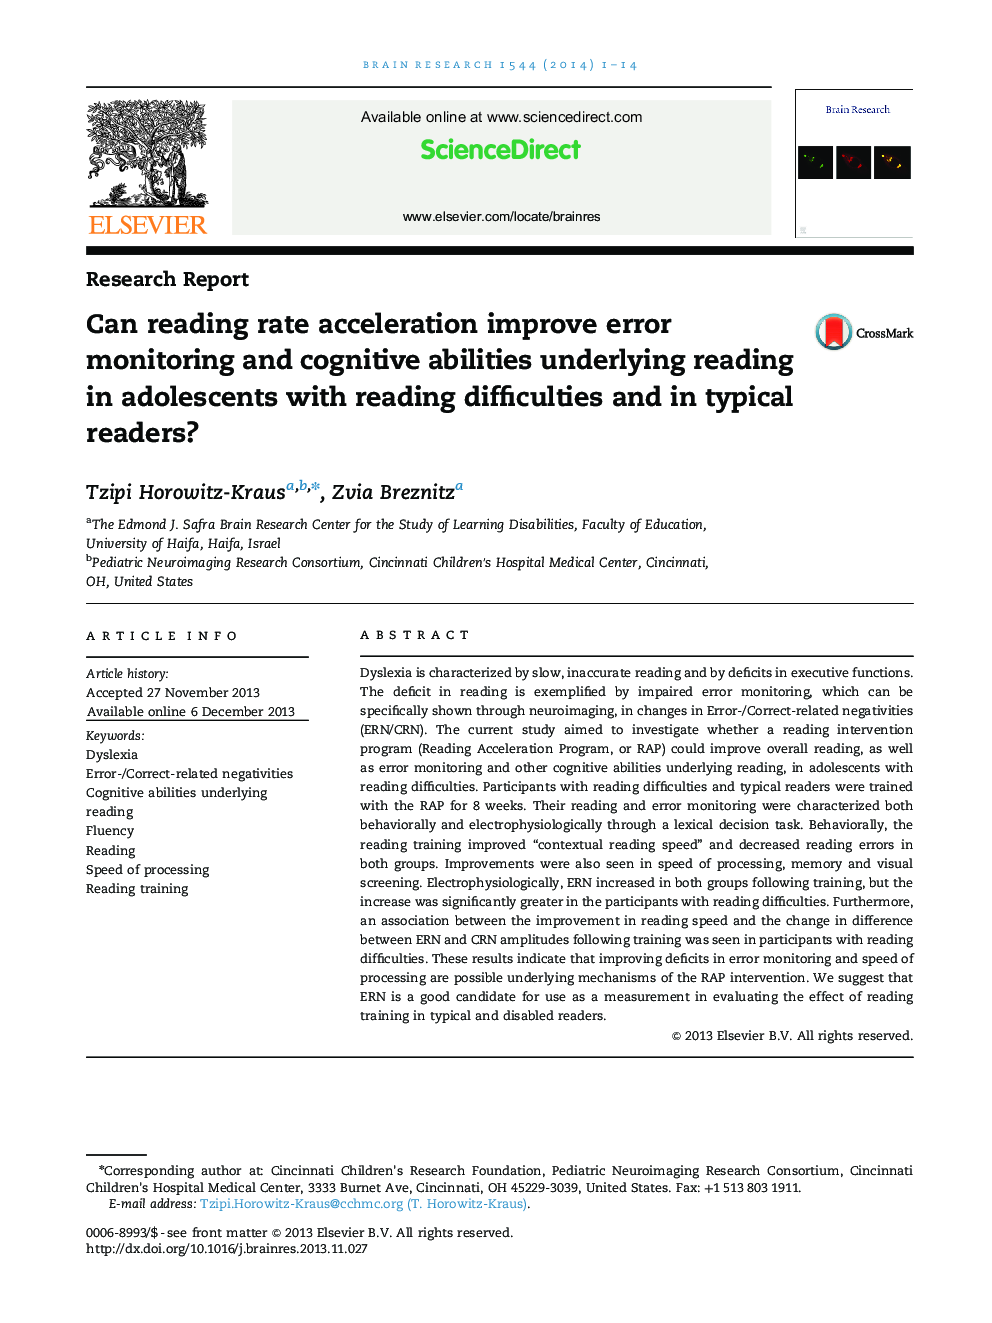 Can reading rate acceleration improve error monitoring and cognitive abilities underlying reading in adolescents with reading difficulties and in typical readers?